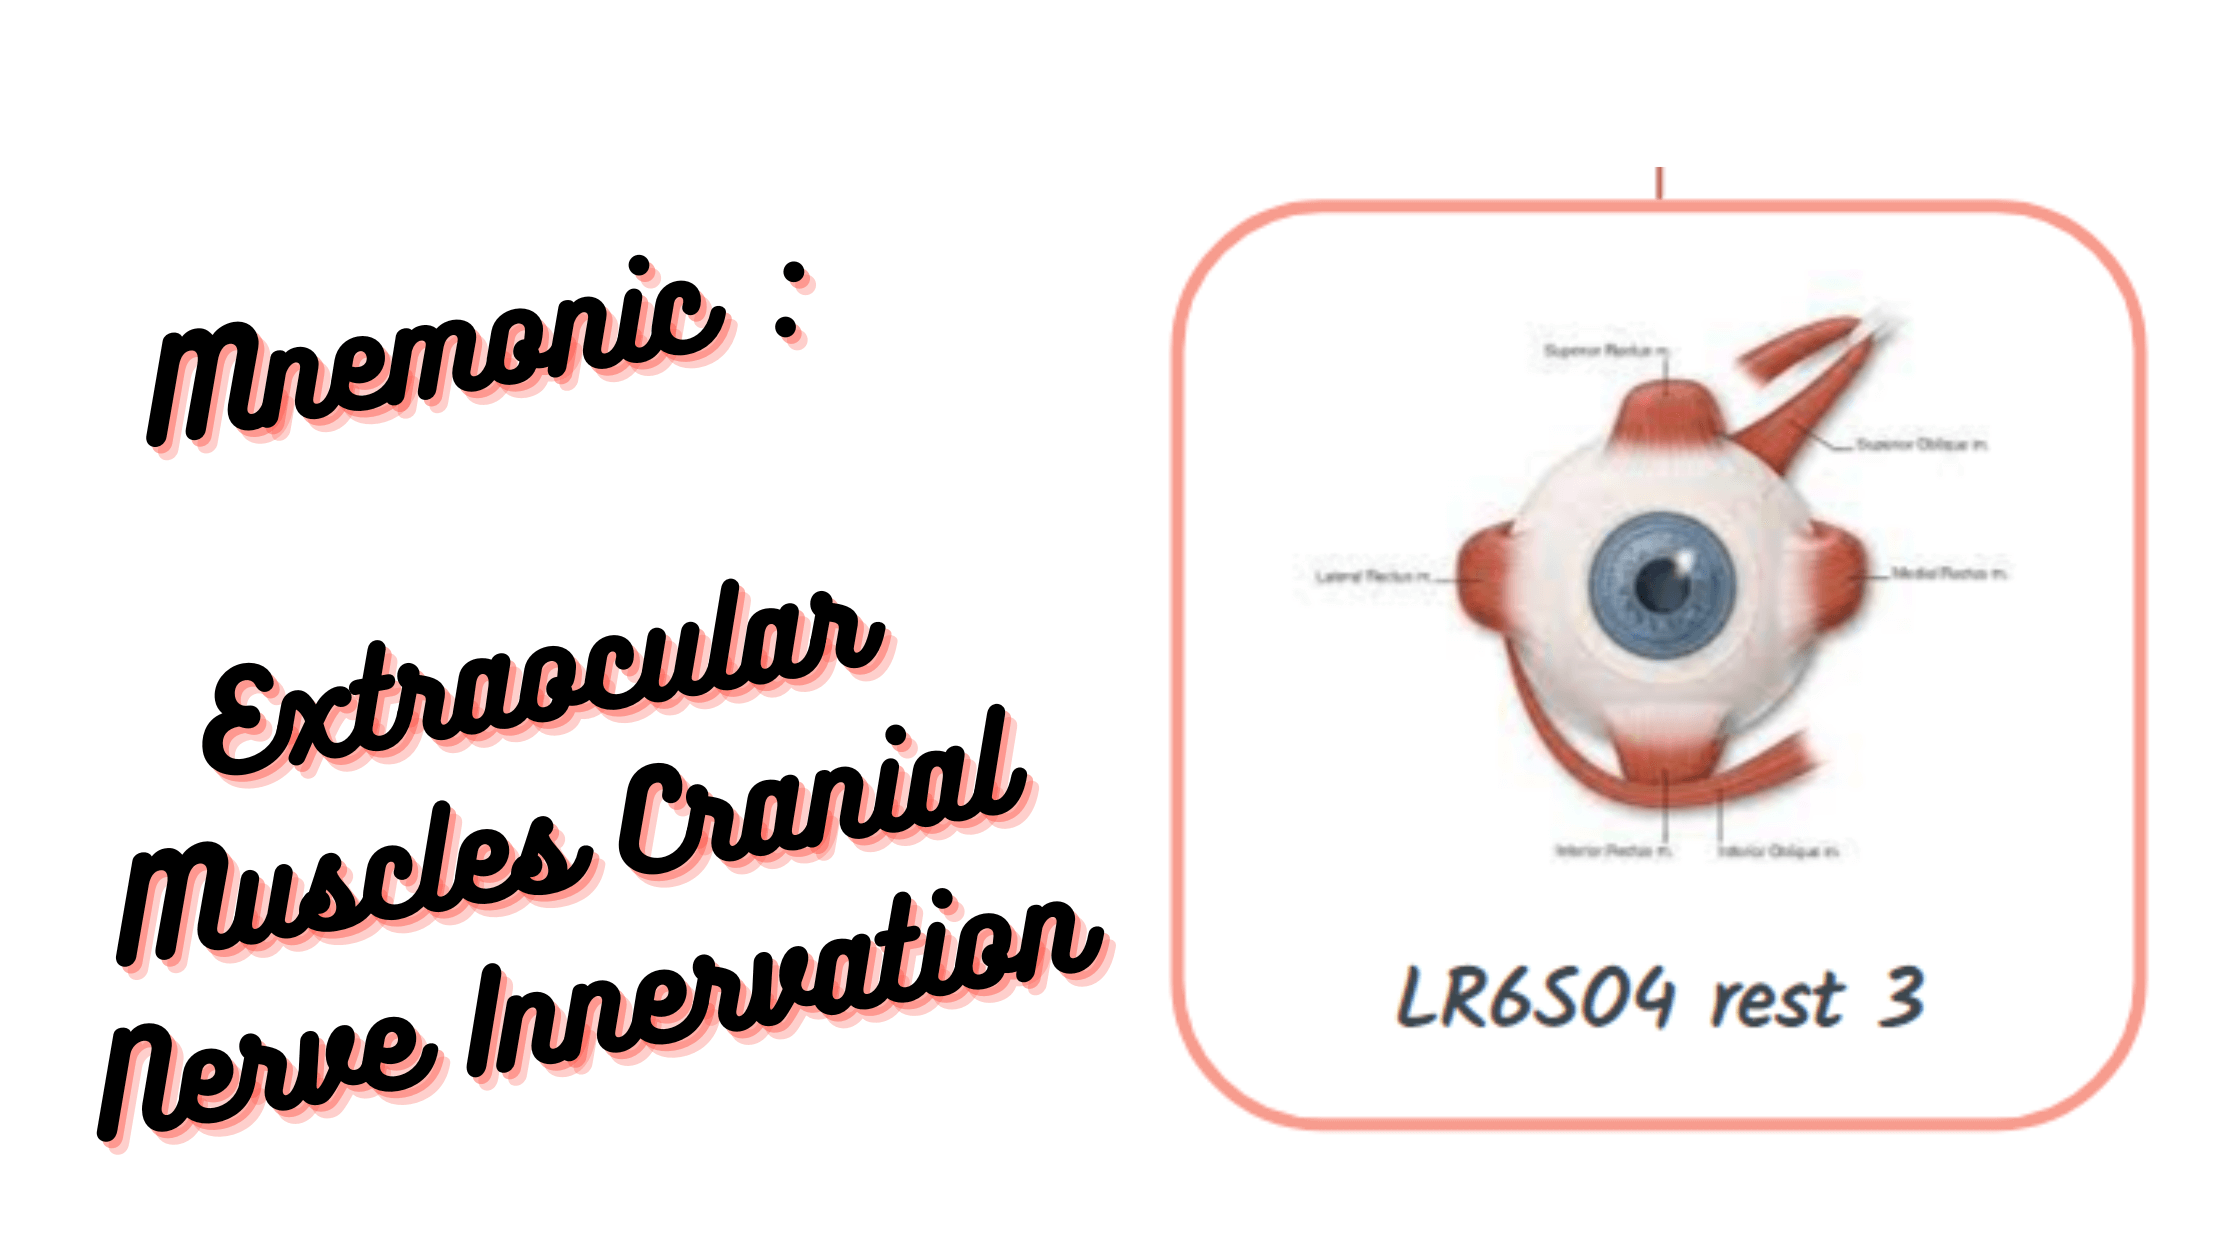 You are currently viewing Mnemonic : Extraocular Muscles Cranial Nerve Innervation